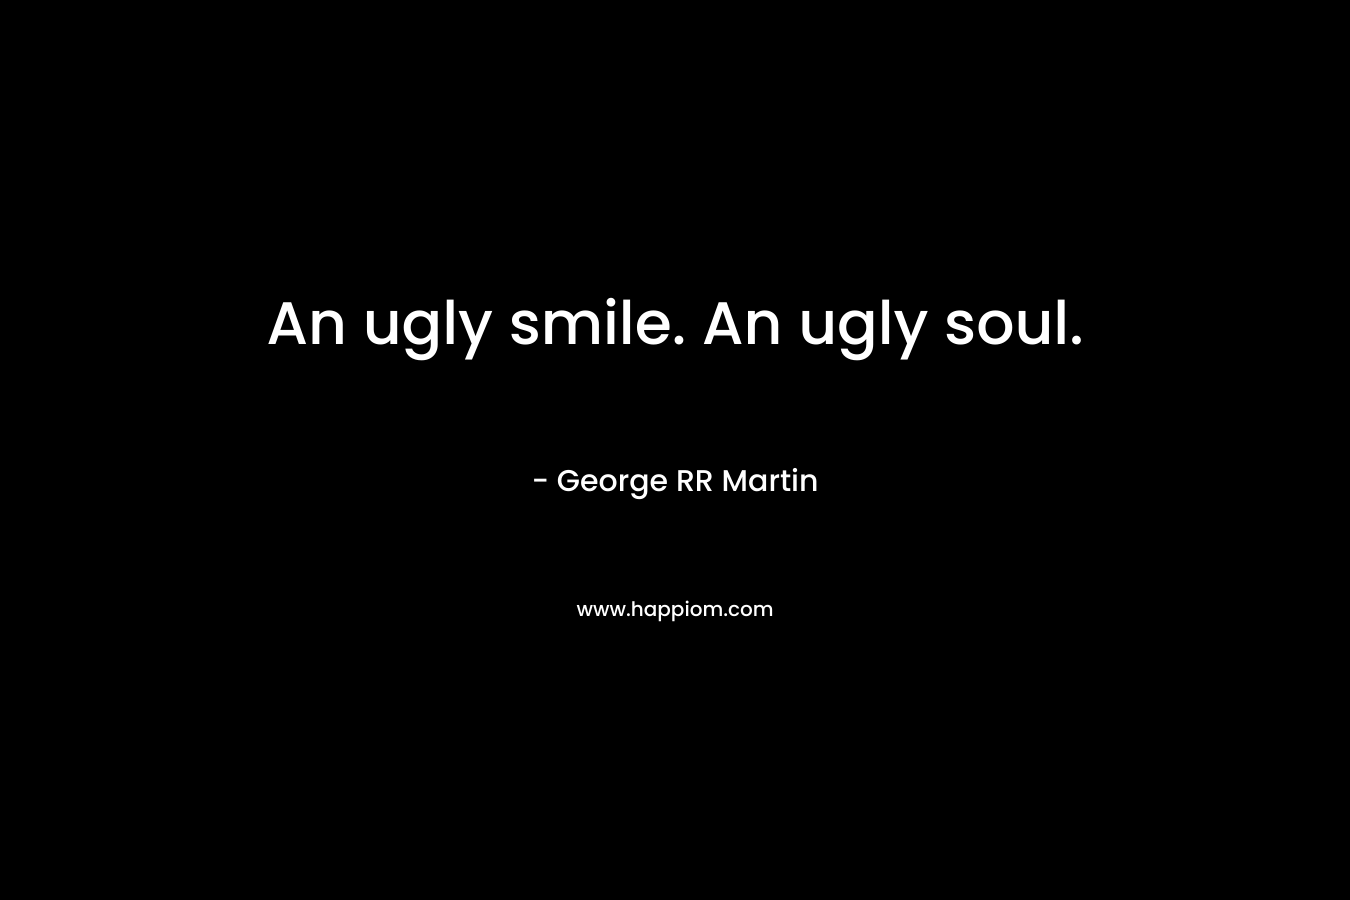 An ugly smile. An ugly soul.